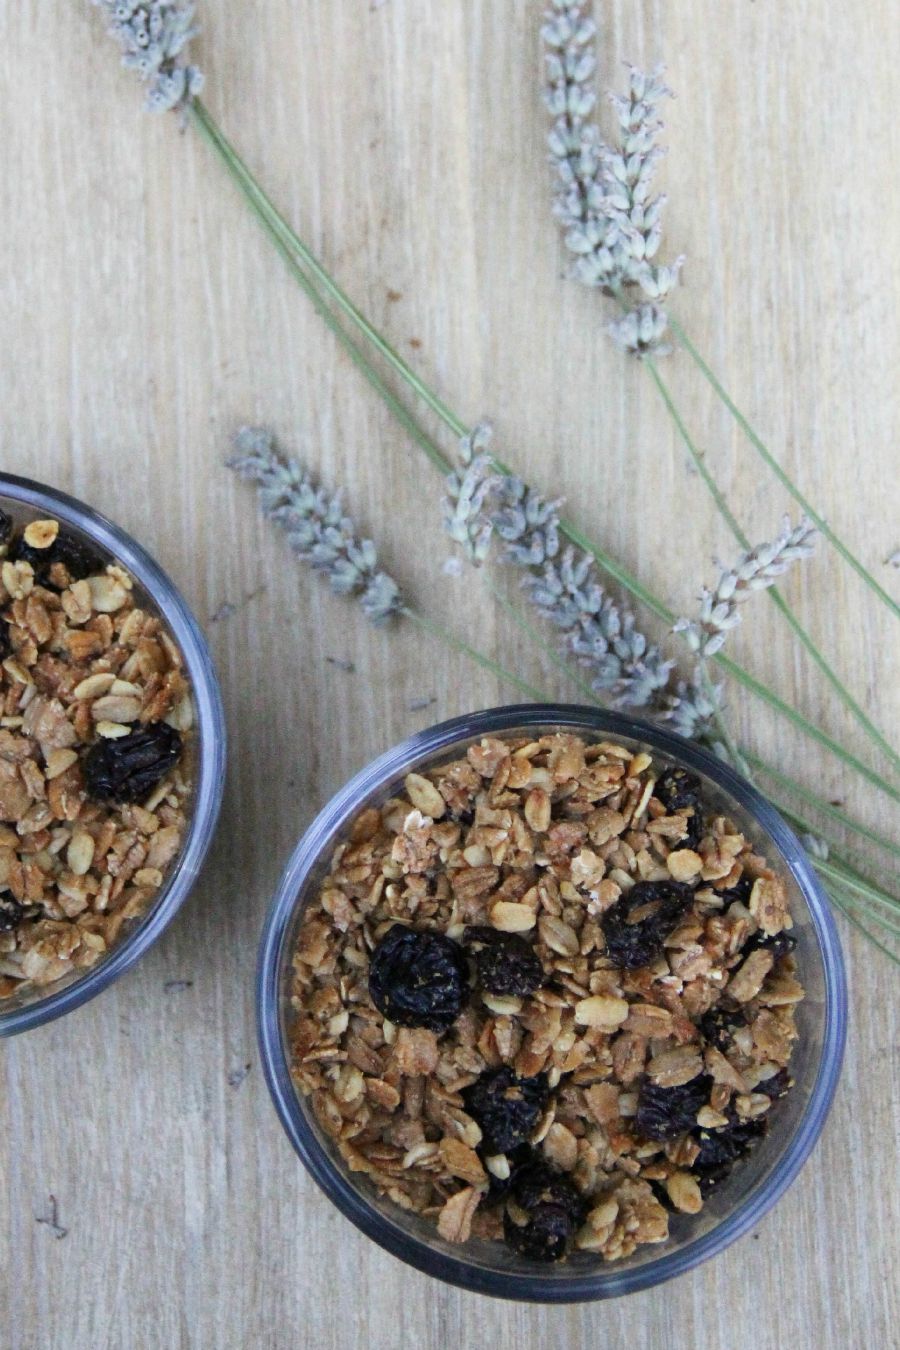 Cherry And Cardamom Granola | Growing Up Herbal | Learn how to make a delicious breakfast granola using the herb cardamom!